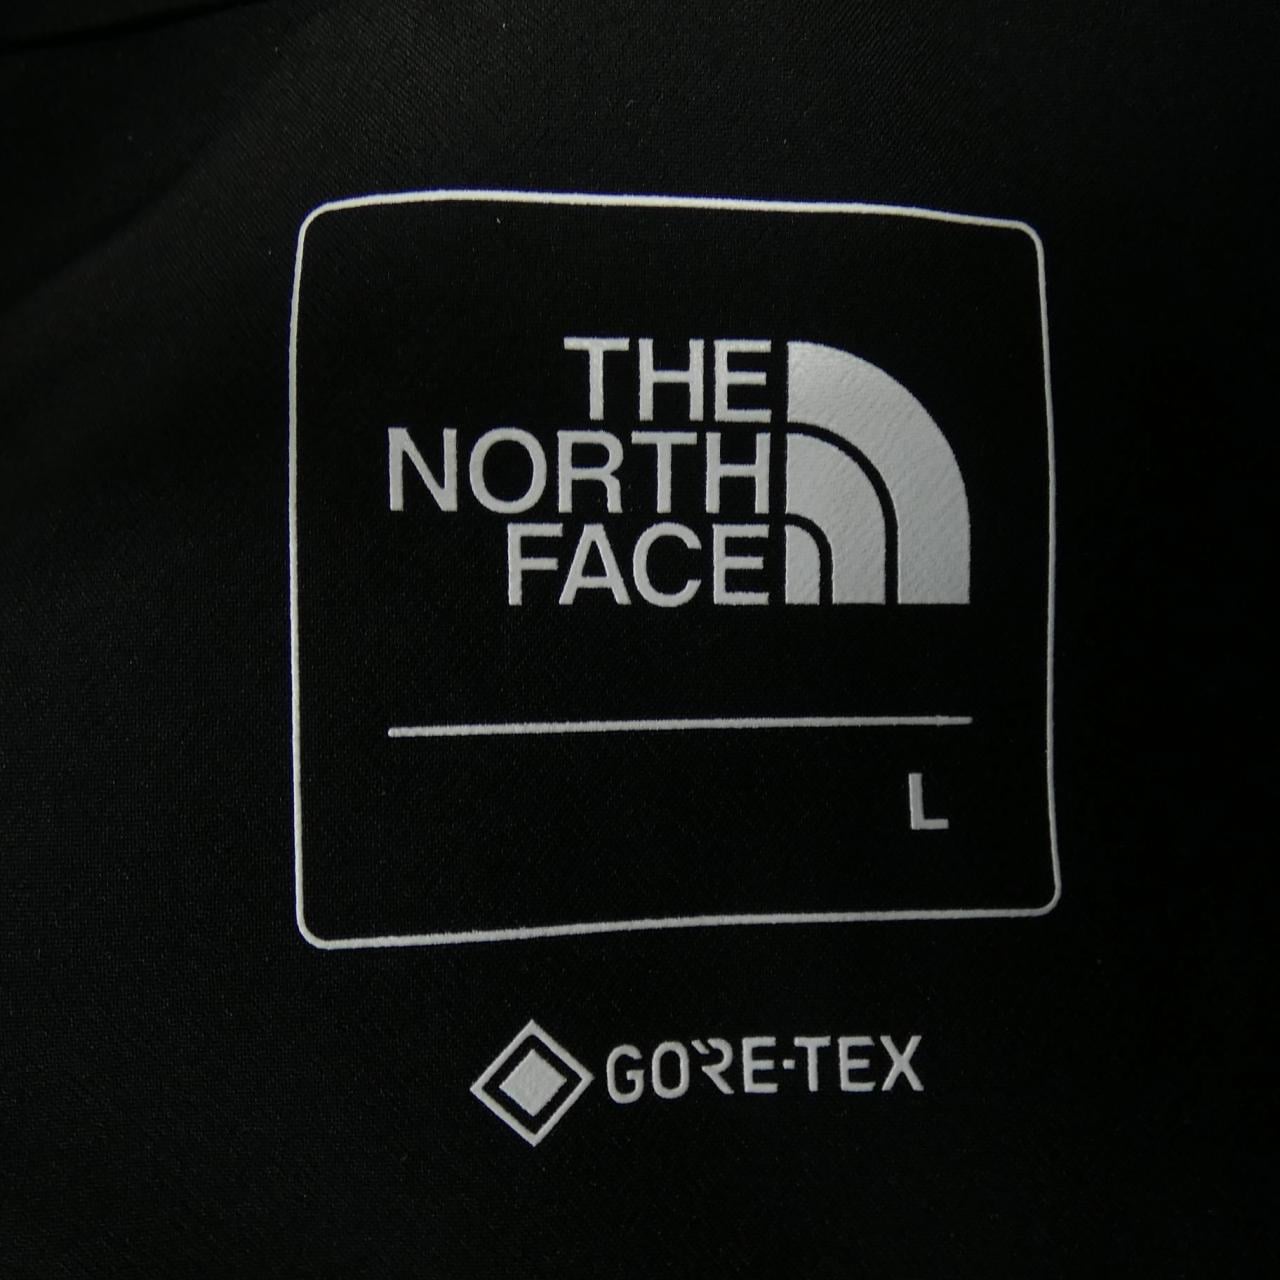 The North Face THE NORTH FACE blouson